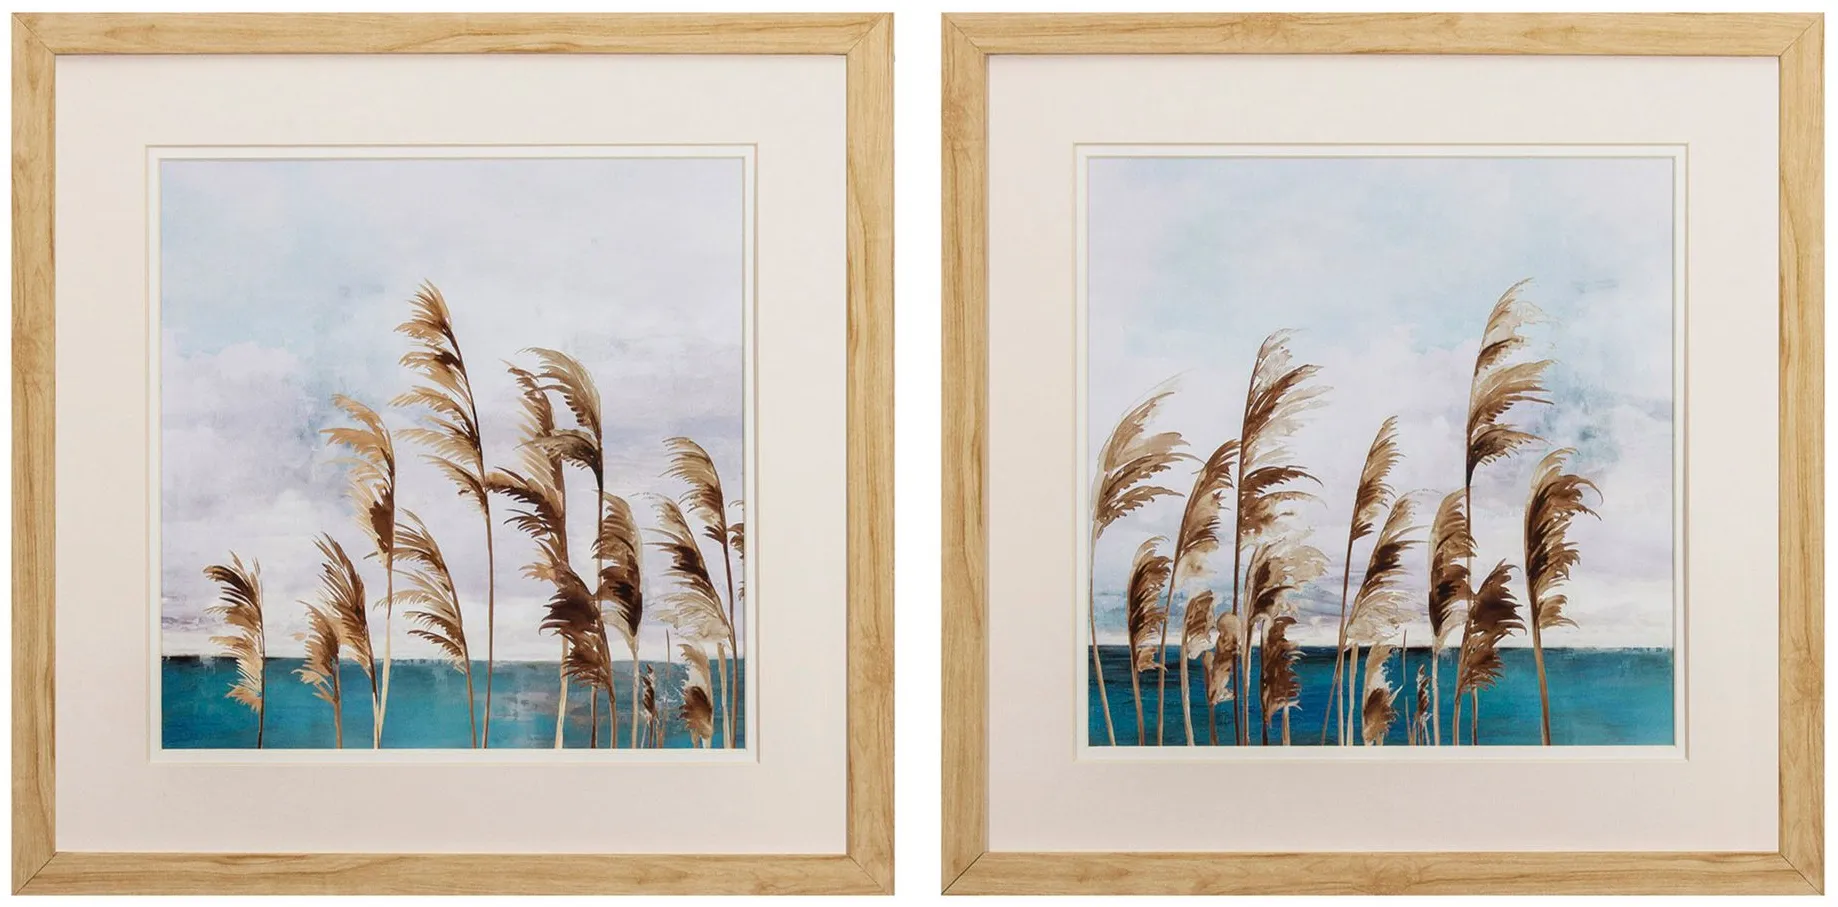 Summer Wind Wall Art in Blue, Tuquoise, Brown, Tan, Cream by Propac Images